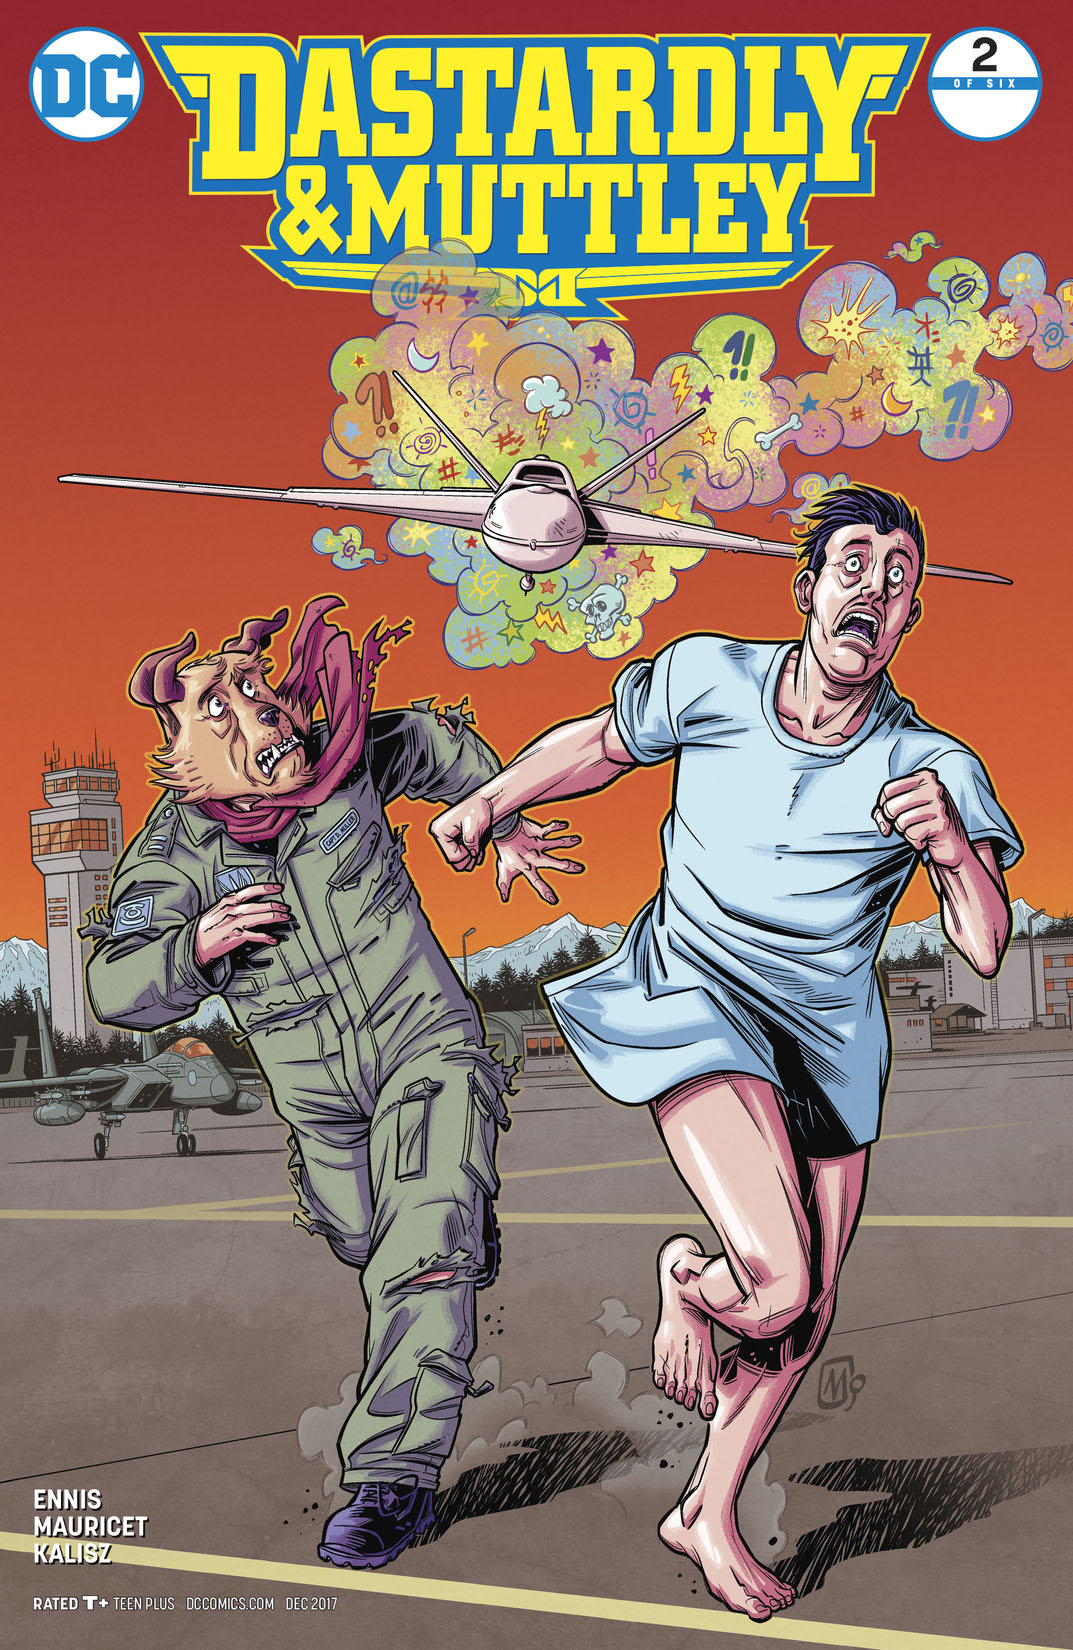 Dastardly & Muttley #2 preview images